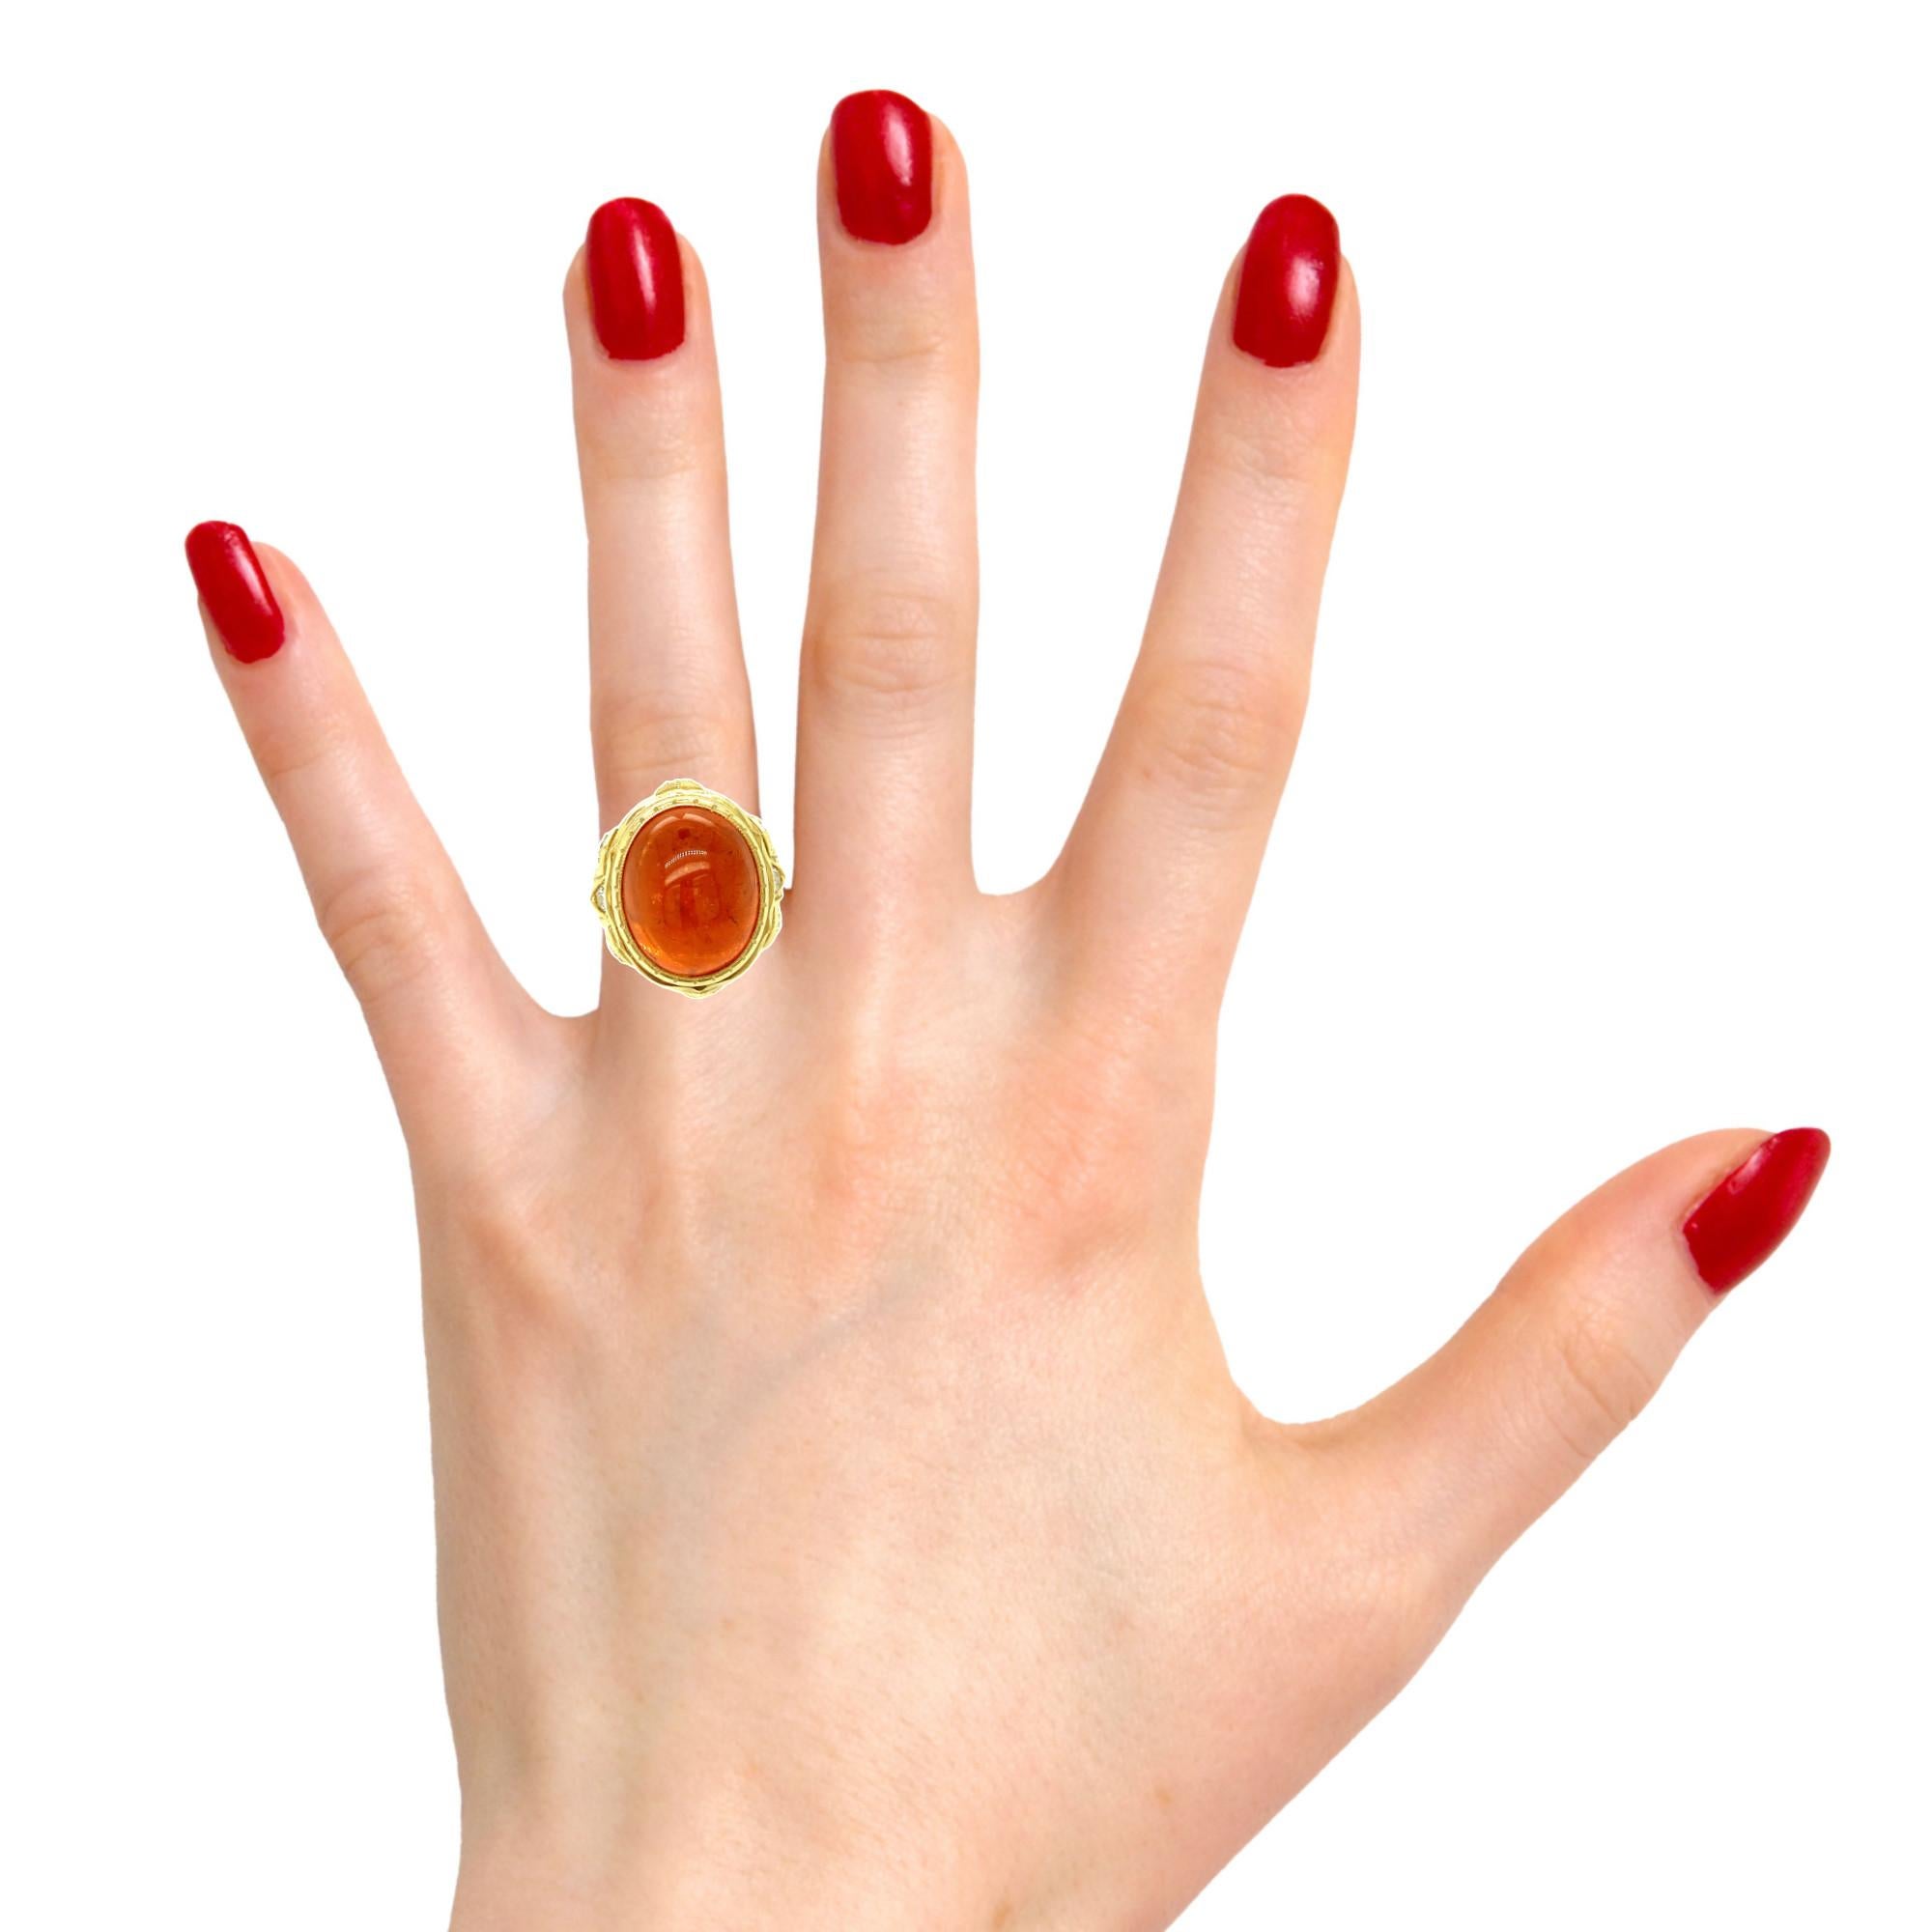 24.39 Carat Spessartite Garnet Cabochon and Diamond, 18k Yellow Gold Ring For Sale 1